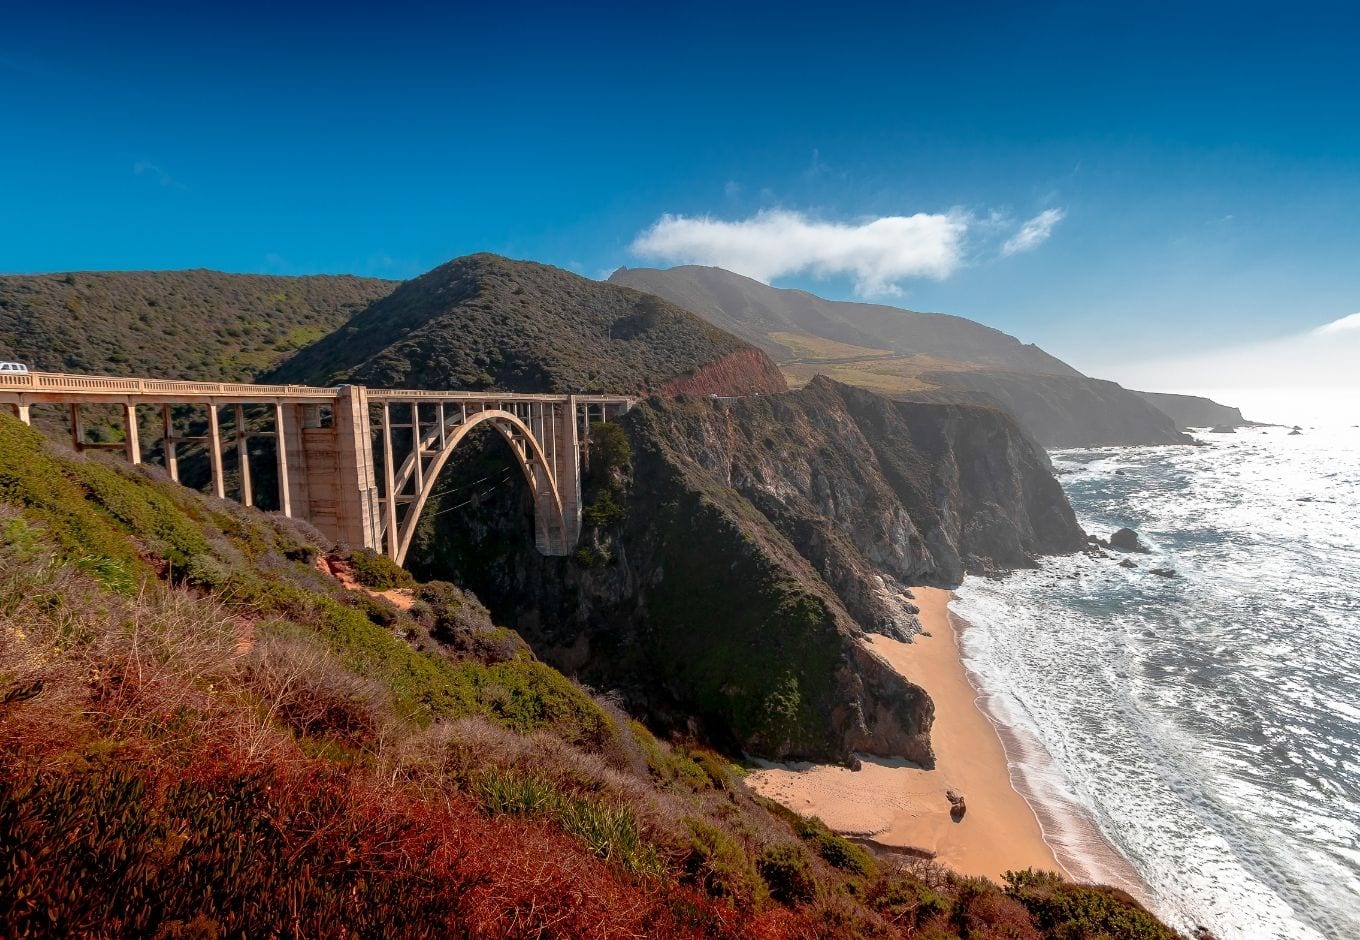 The Big Sur, on the Pacific Coast Highway, in California.